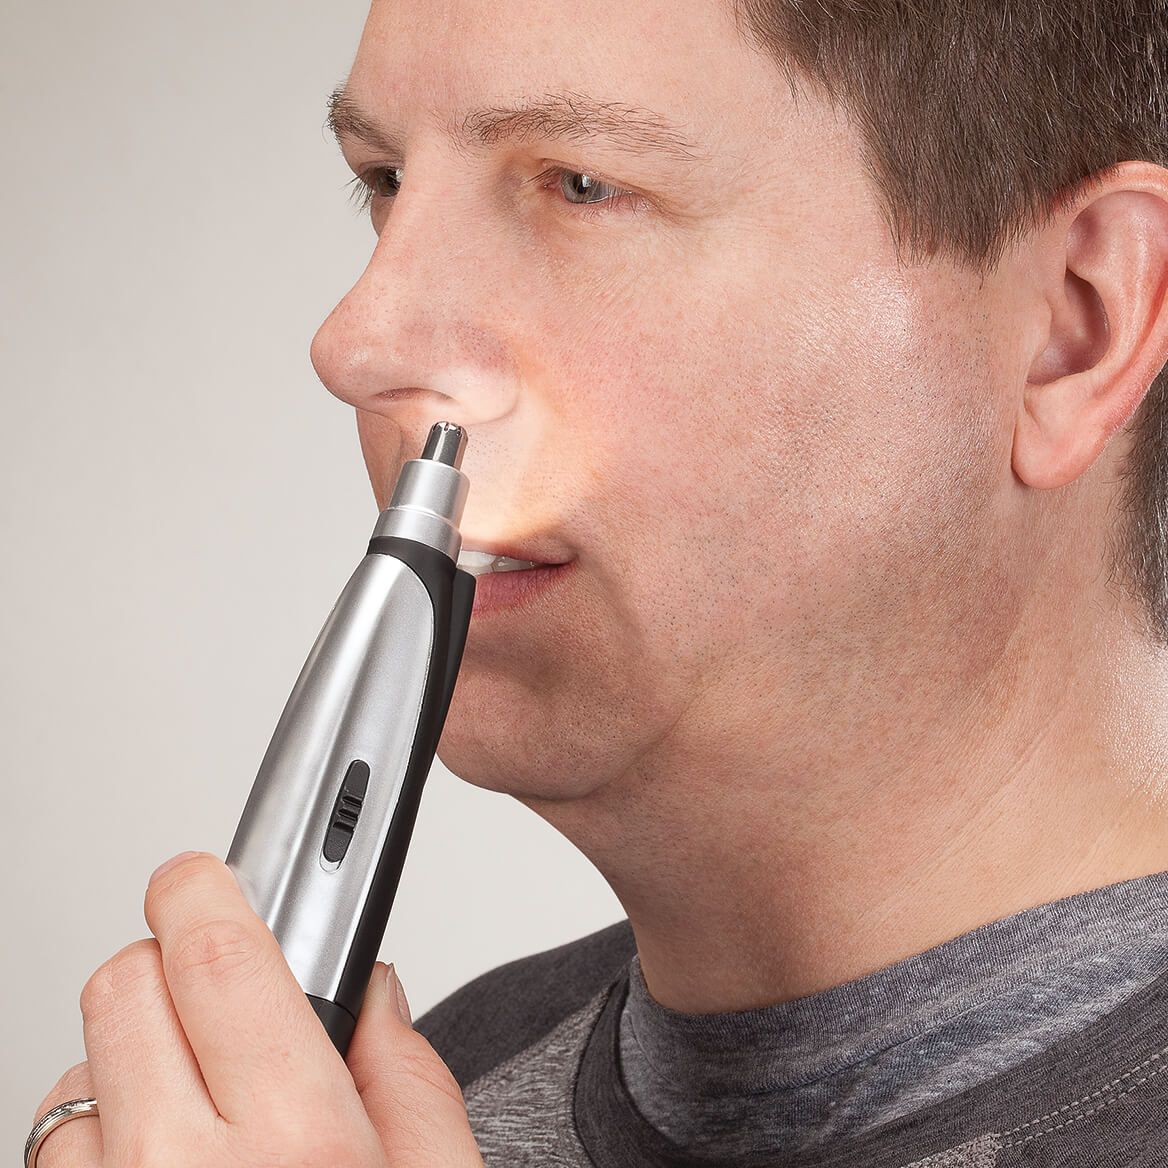 Lighted Nose and Ear Hair Trimmer + '-' + 367415